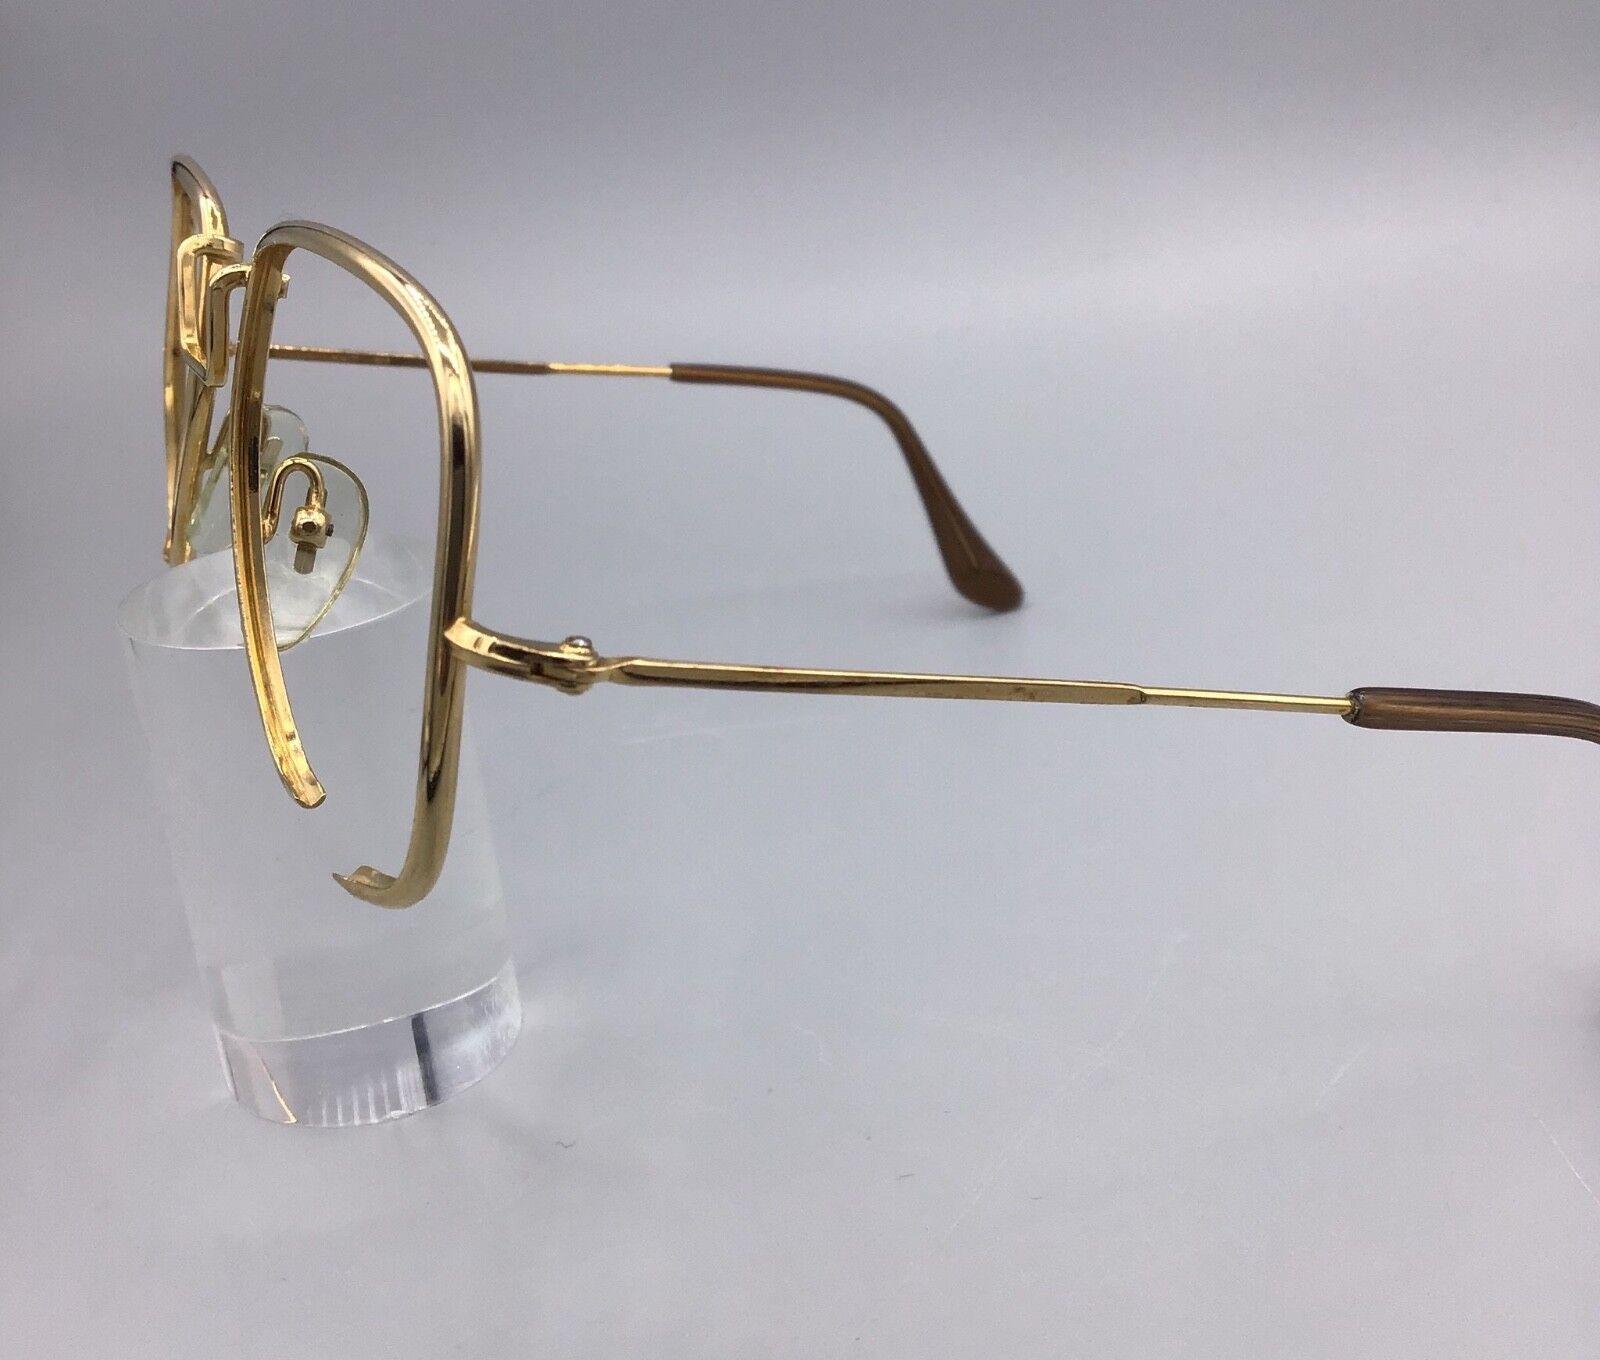 Ray Ban Bausch&Lomb vintage eyewear frame brillen lunettes glasses occhiale 70s